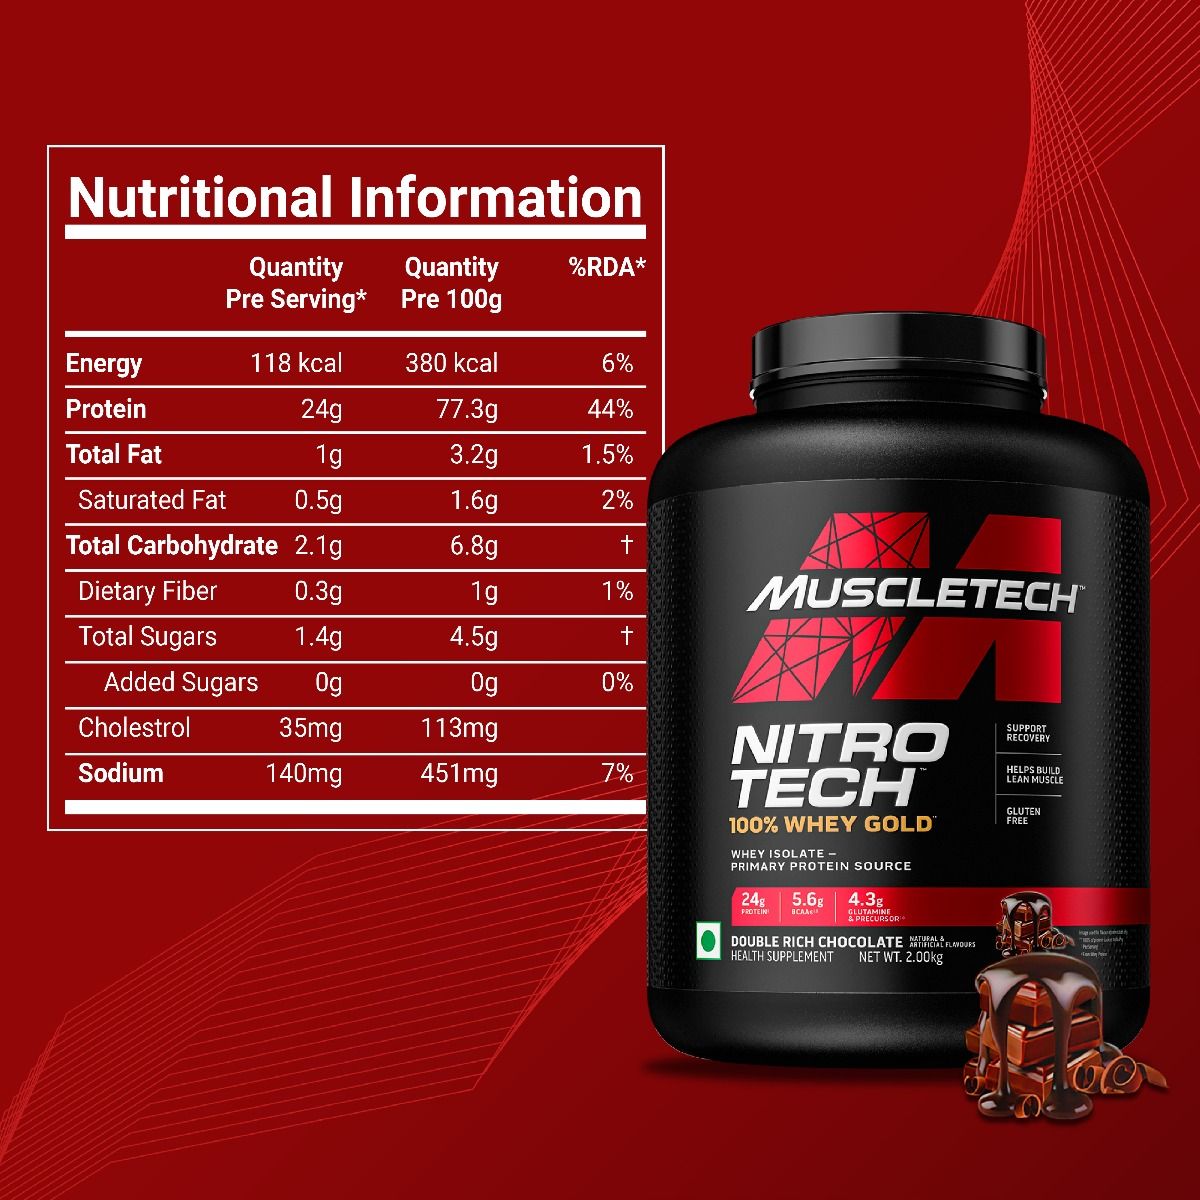 MuscleTech Nitrotech 100% Whey Gold Double Rich Chocolate Flavour Powder, 2 kg, Pack of 1 